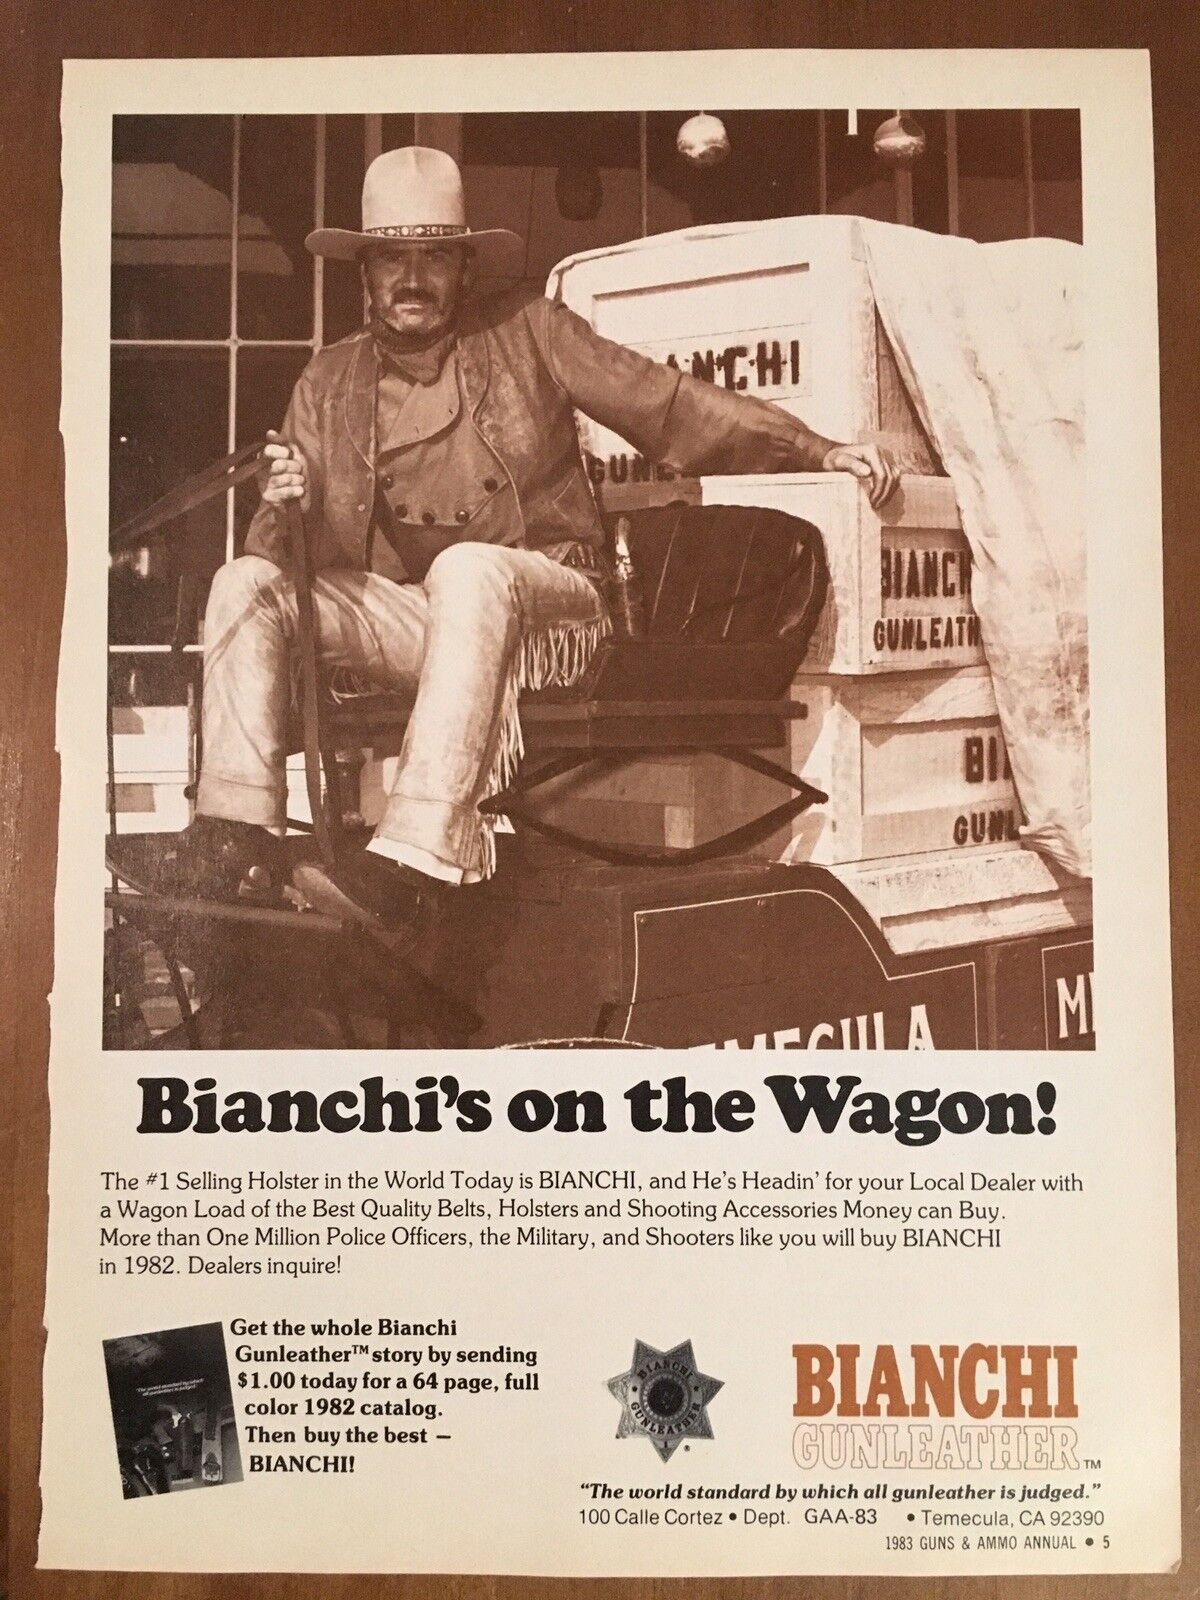 1982 Bianchi’s Gunleather Vintage Hunting Advertising “Bianchi’s On The Wagon!”